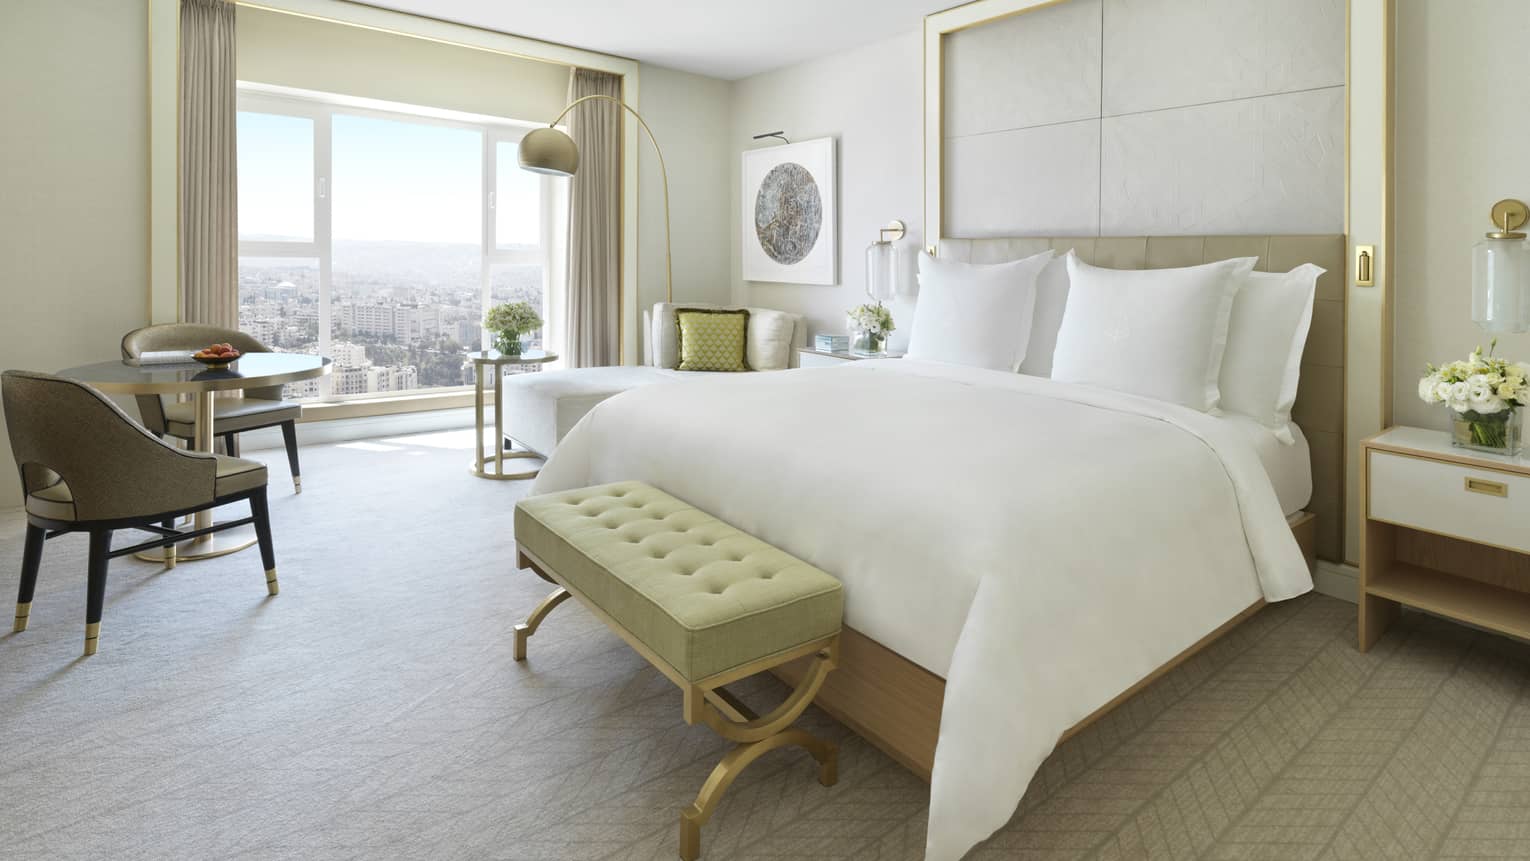 A spacious suite with a large bed in the centre of the room. Opens to a floor-to-ceiling window overlooking Amman.